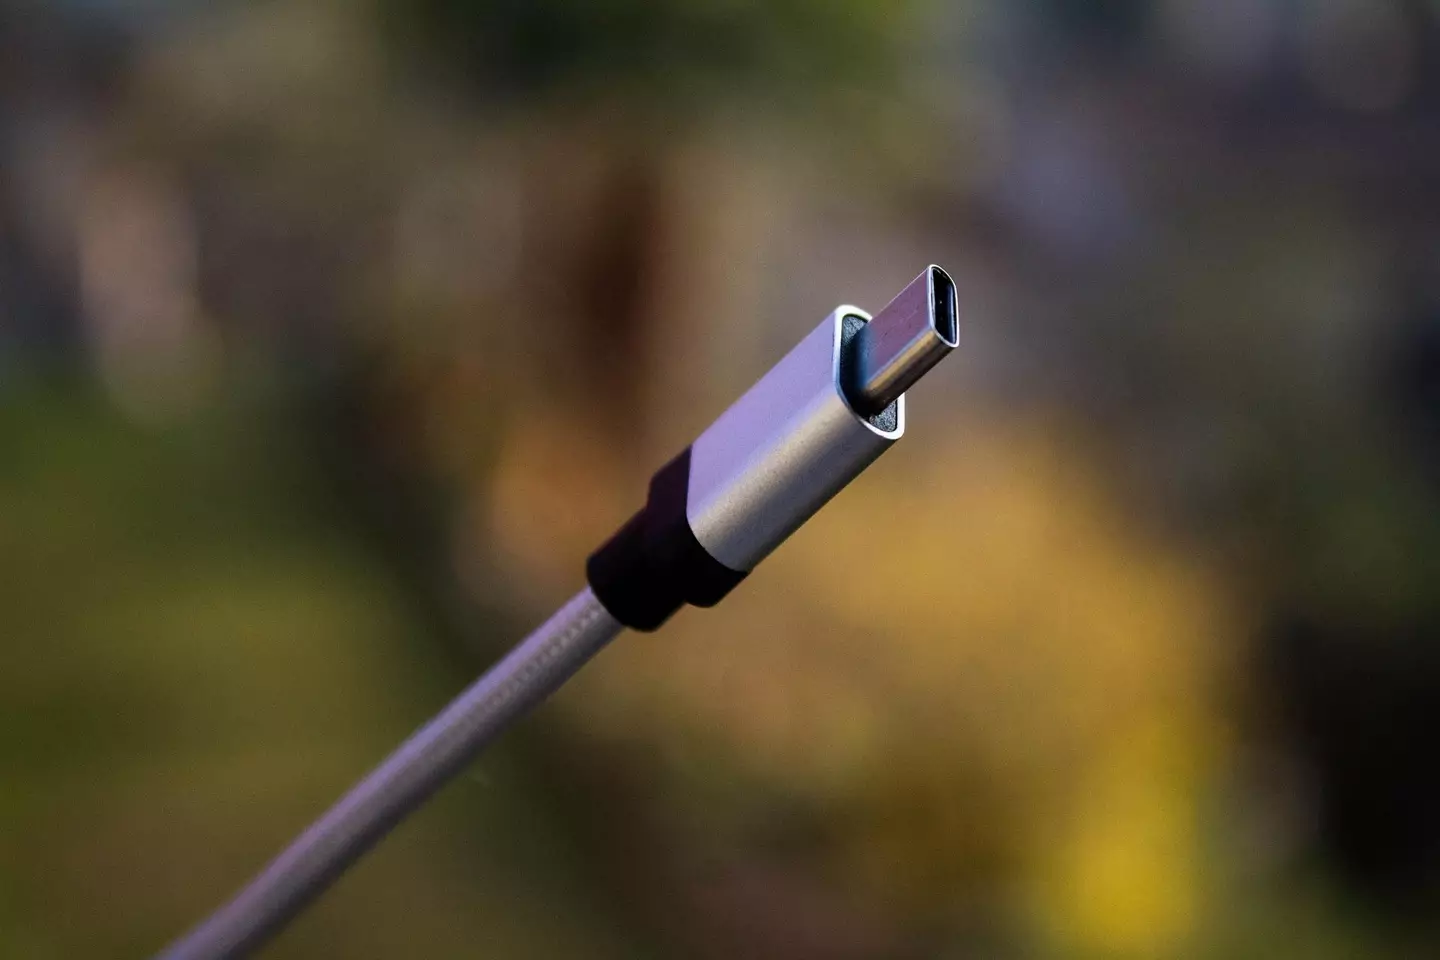 USB-C cables could soon become the industry standard.